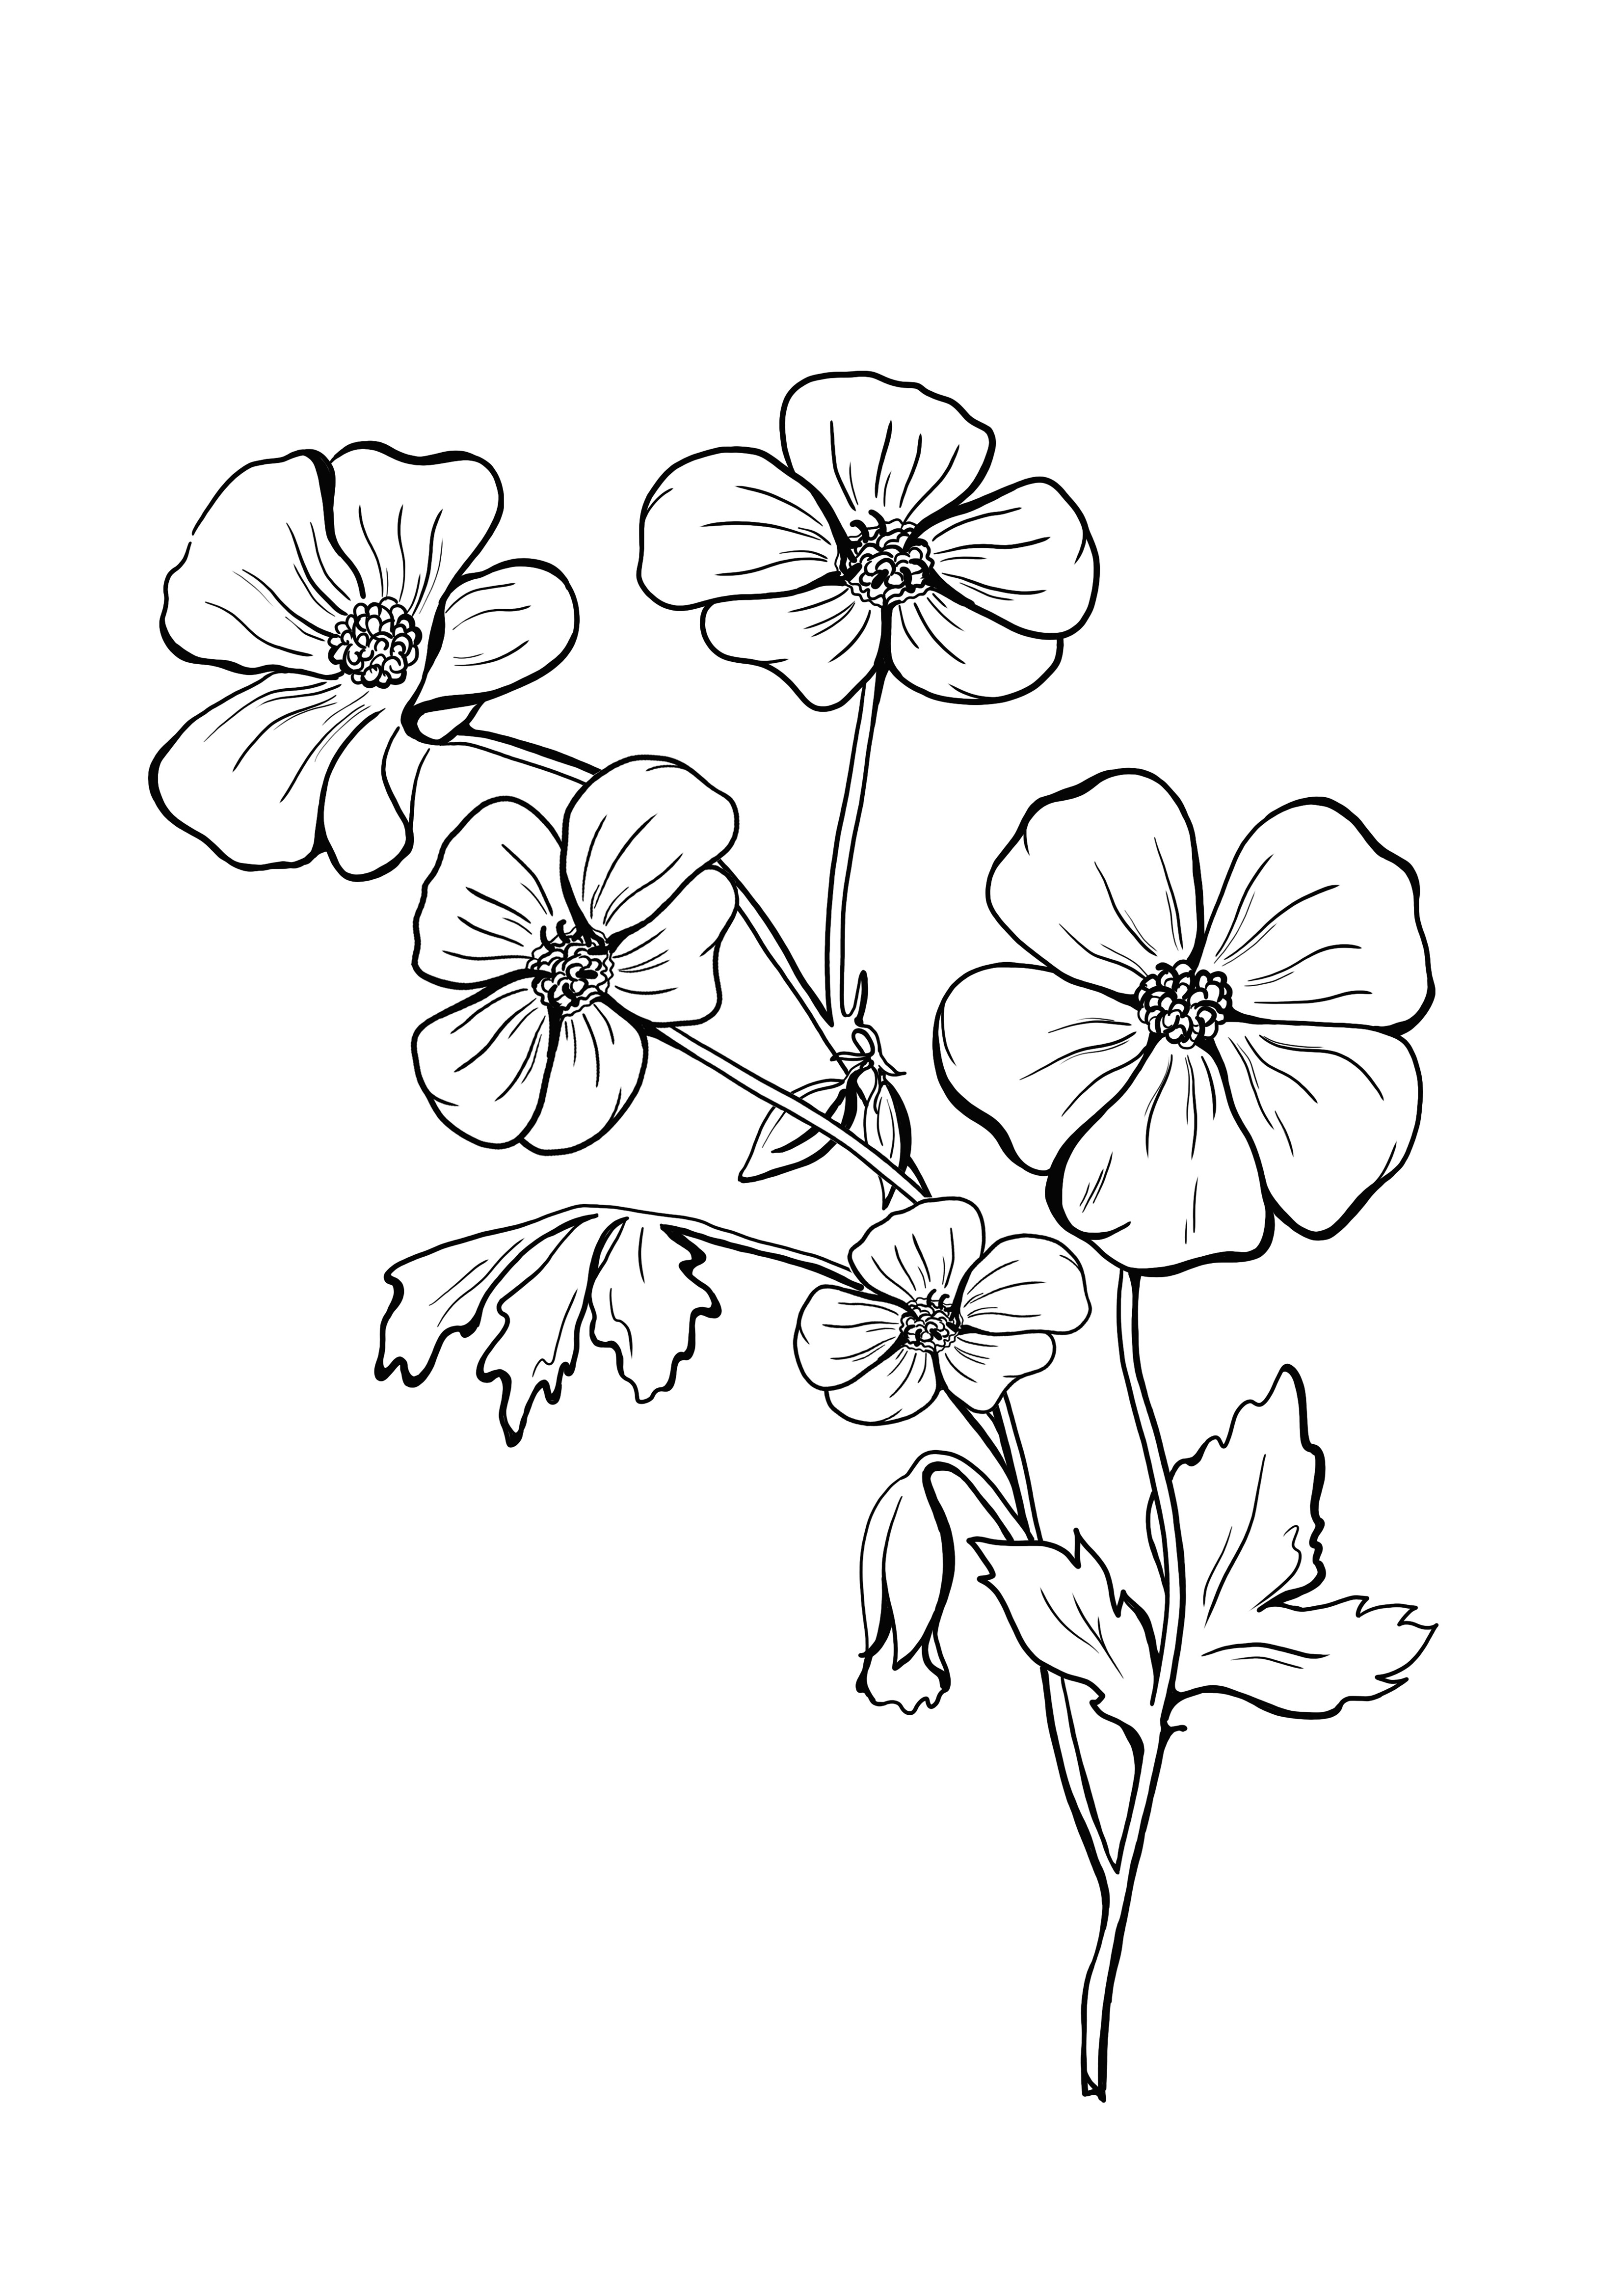 Geranium to color and free printing